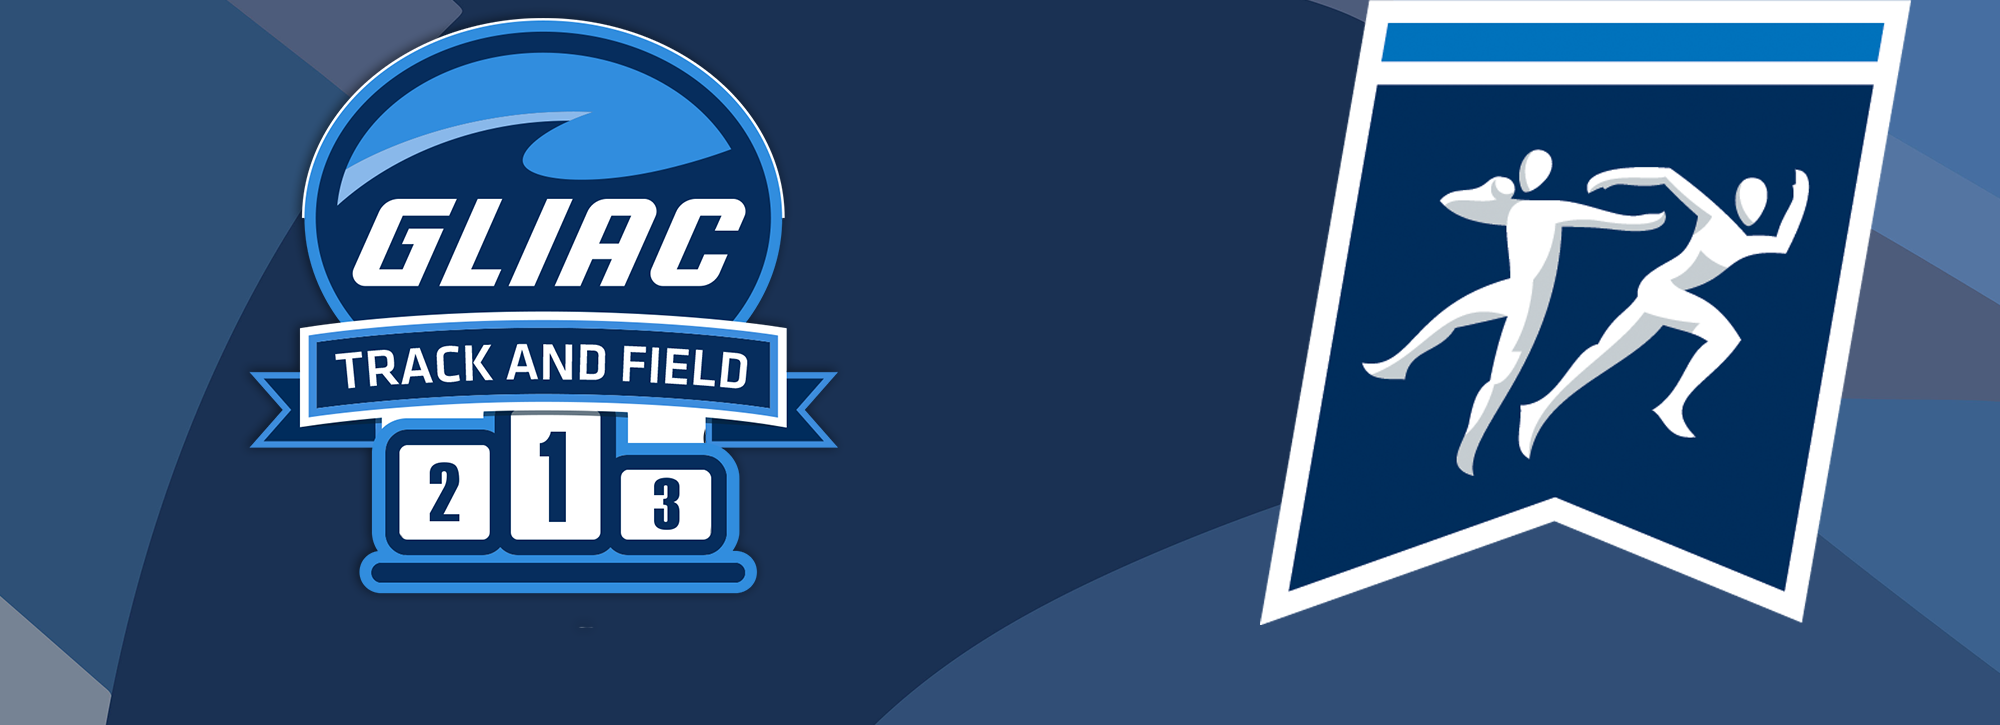 2021 NCAA Division II Men's and Women's Indoor Track and Field Championships Qualifiers Announced